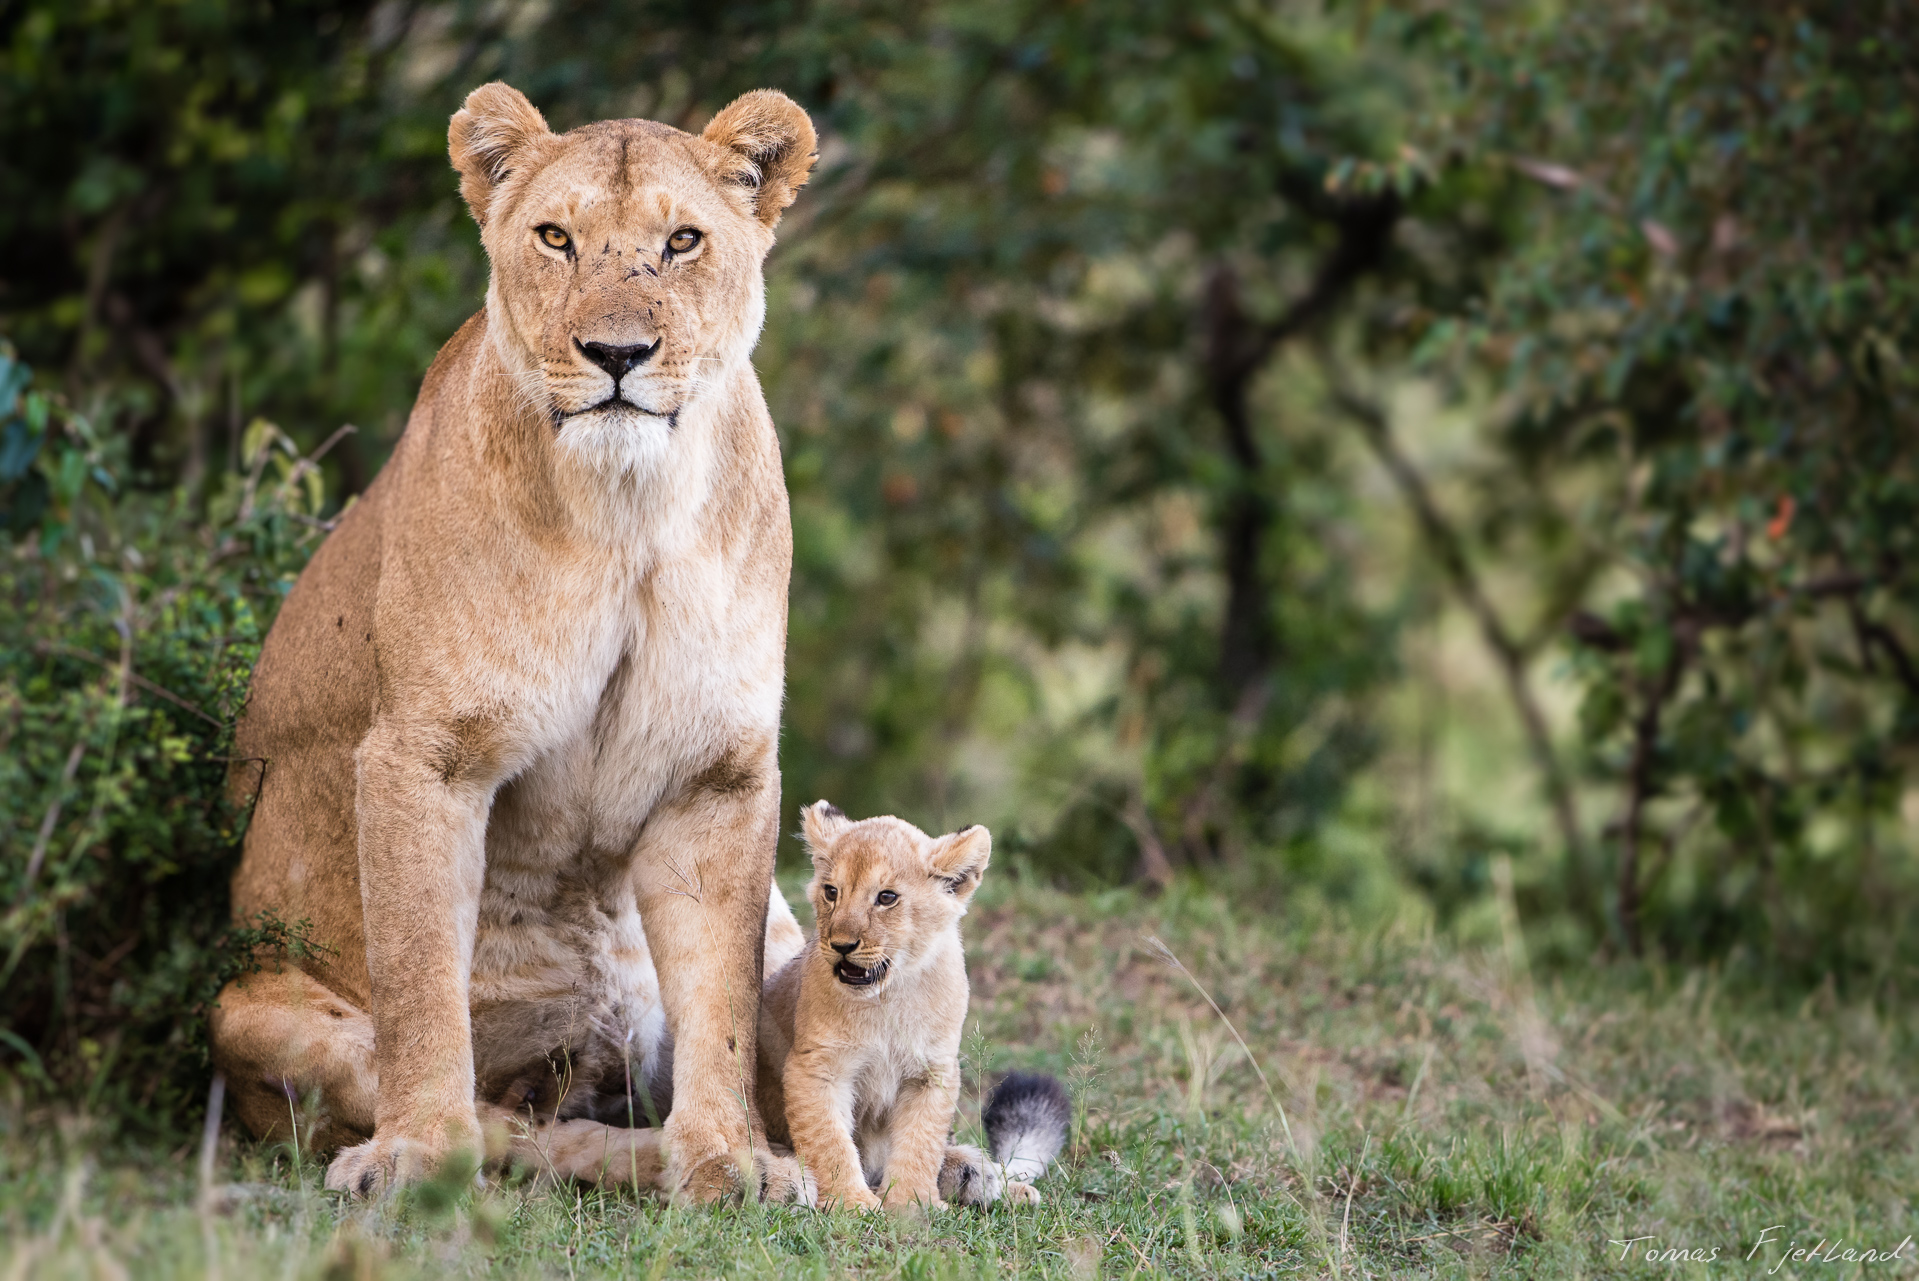 Lioness with one of her little cubs.